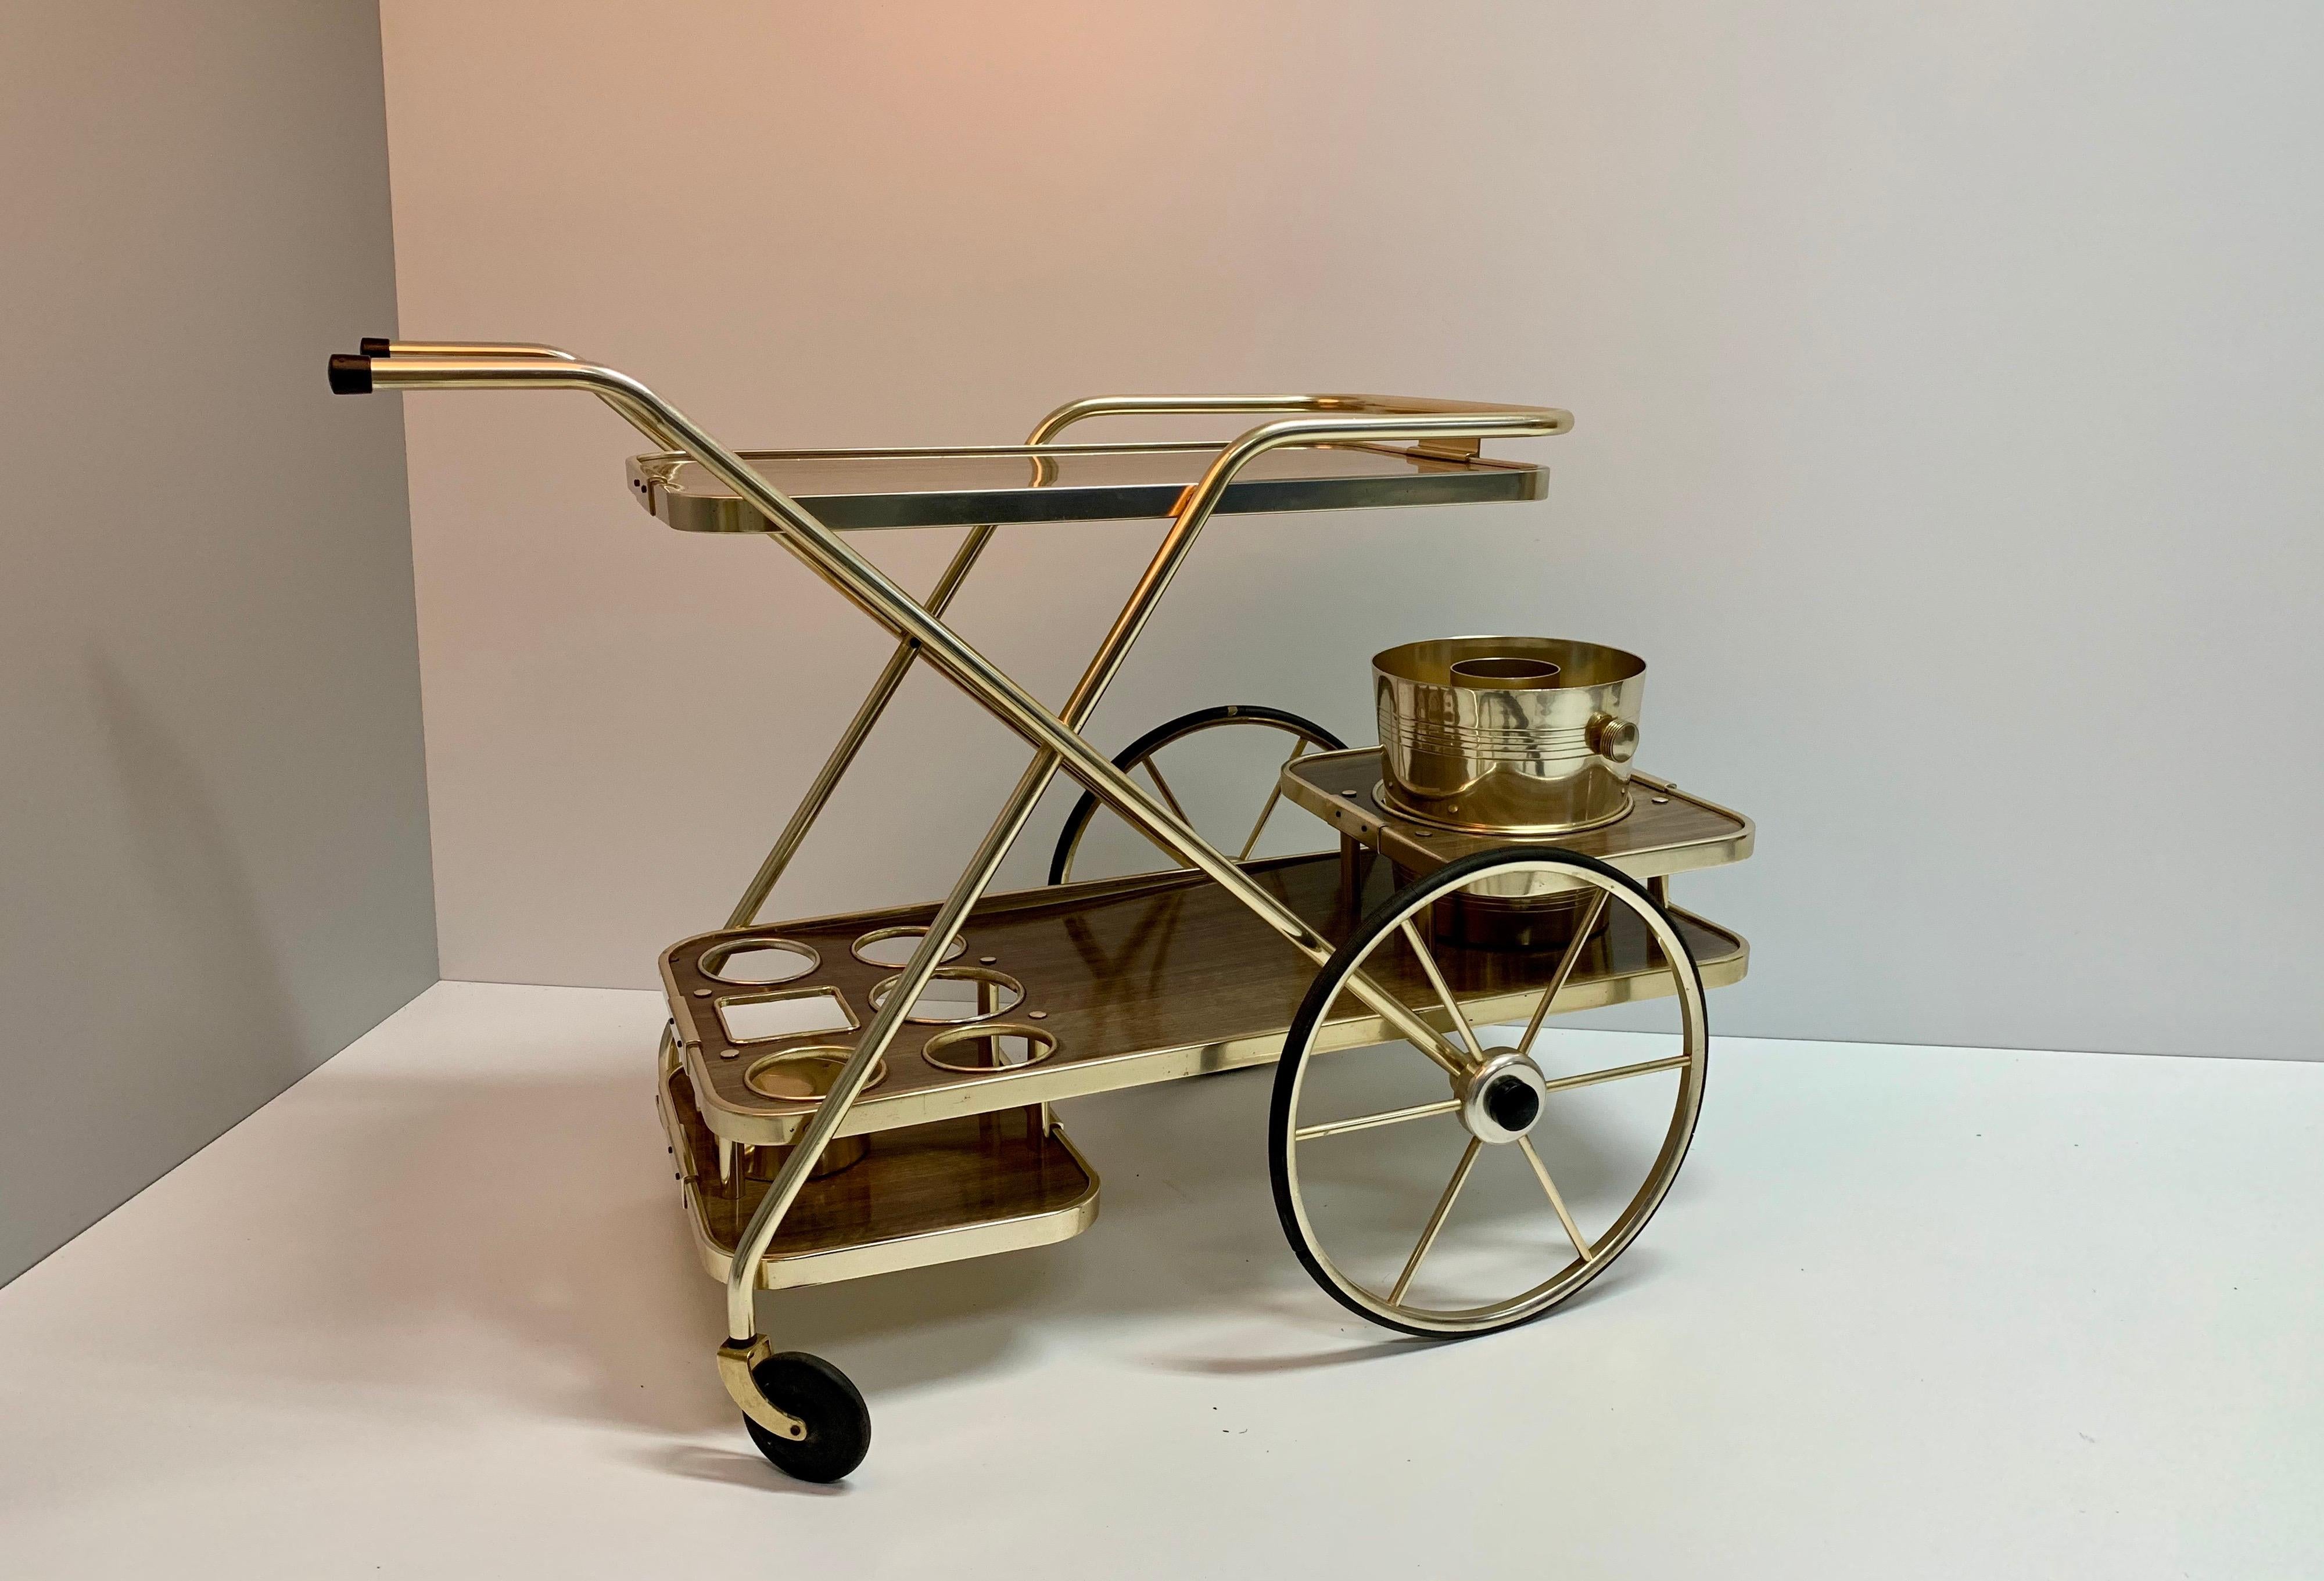 For your consideration, bar cart with champagne bucket by Kaymet, made in England, beautiful and lightweight anodized aluminum and stainless steel. Few pieces like this.
 